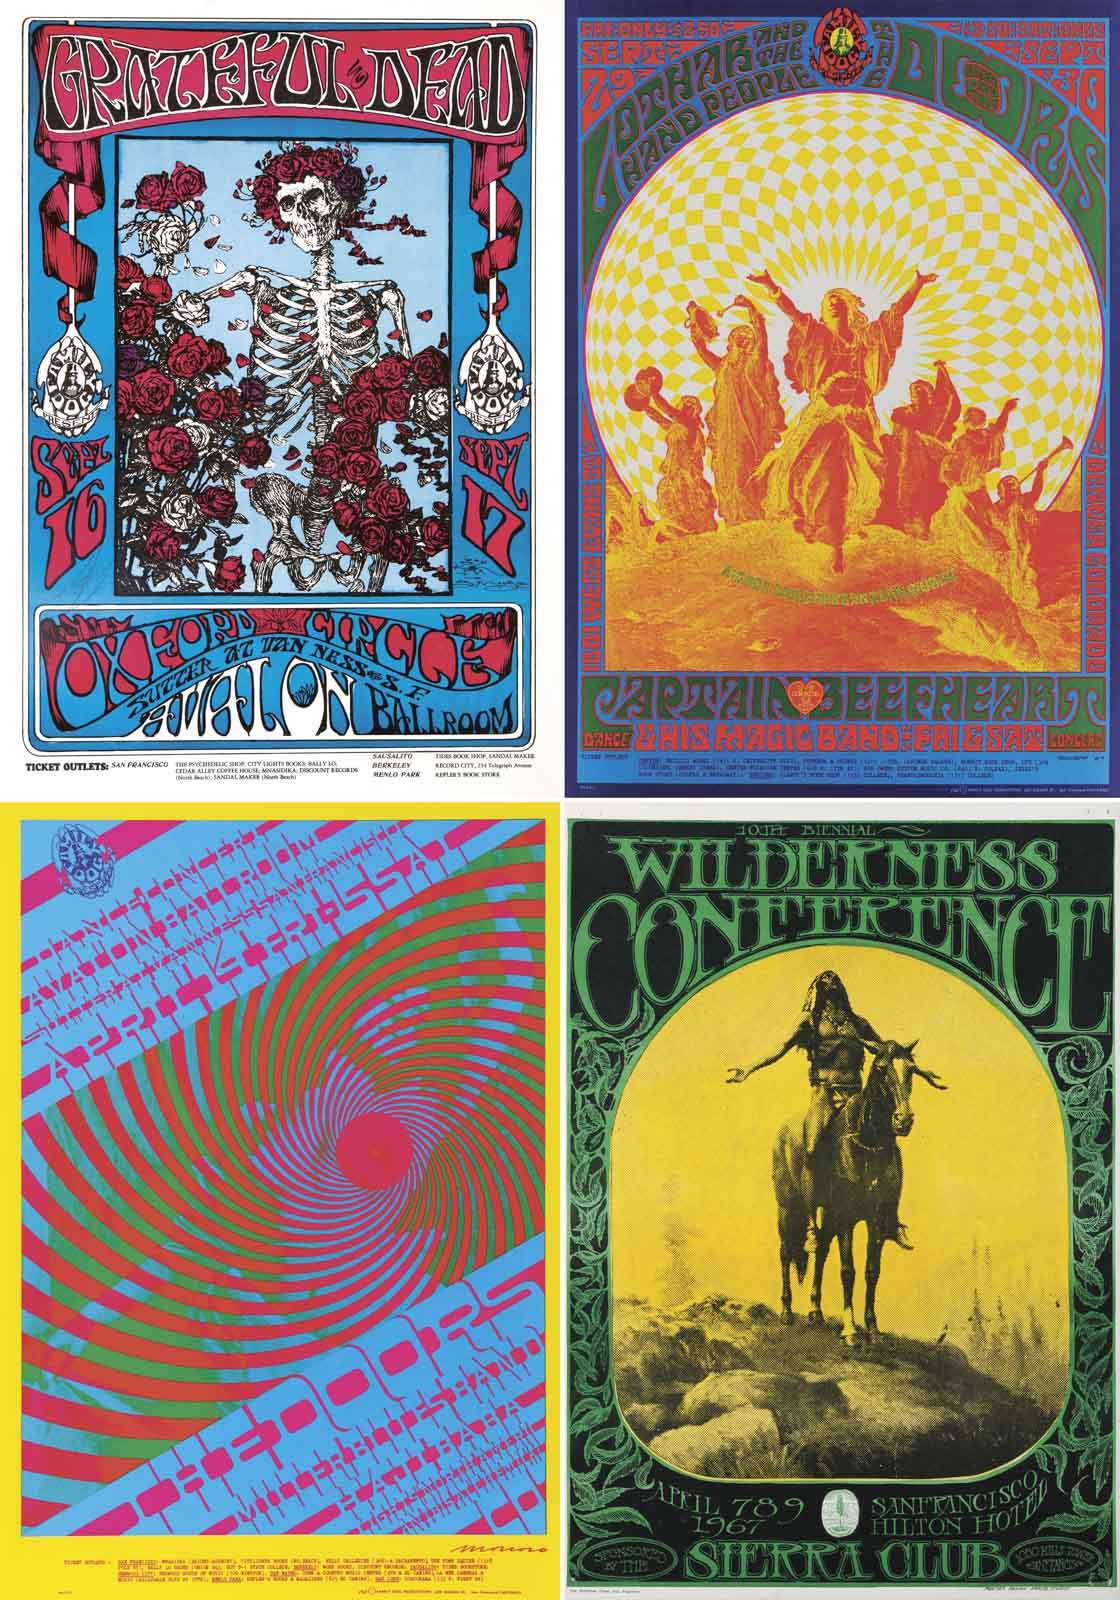 Psychedelic Posters and Fashion in San Francisco